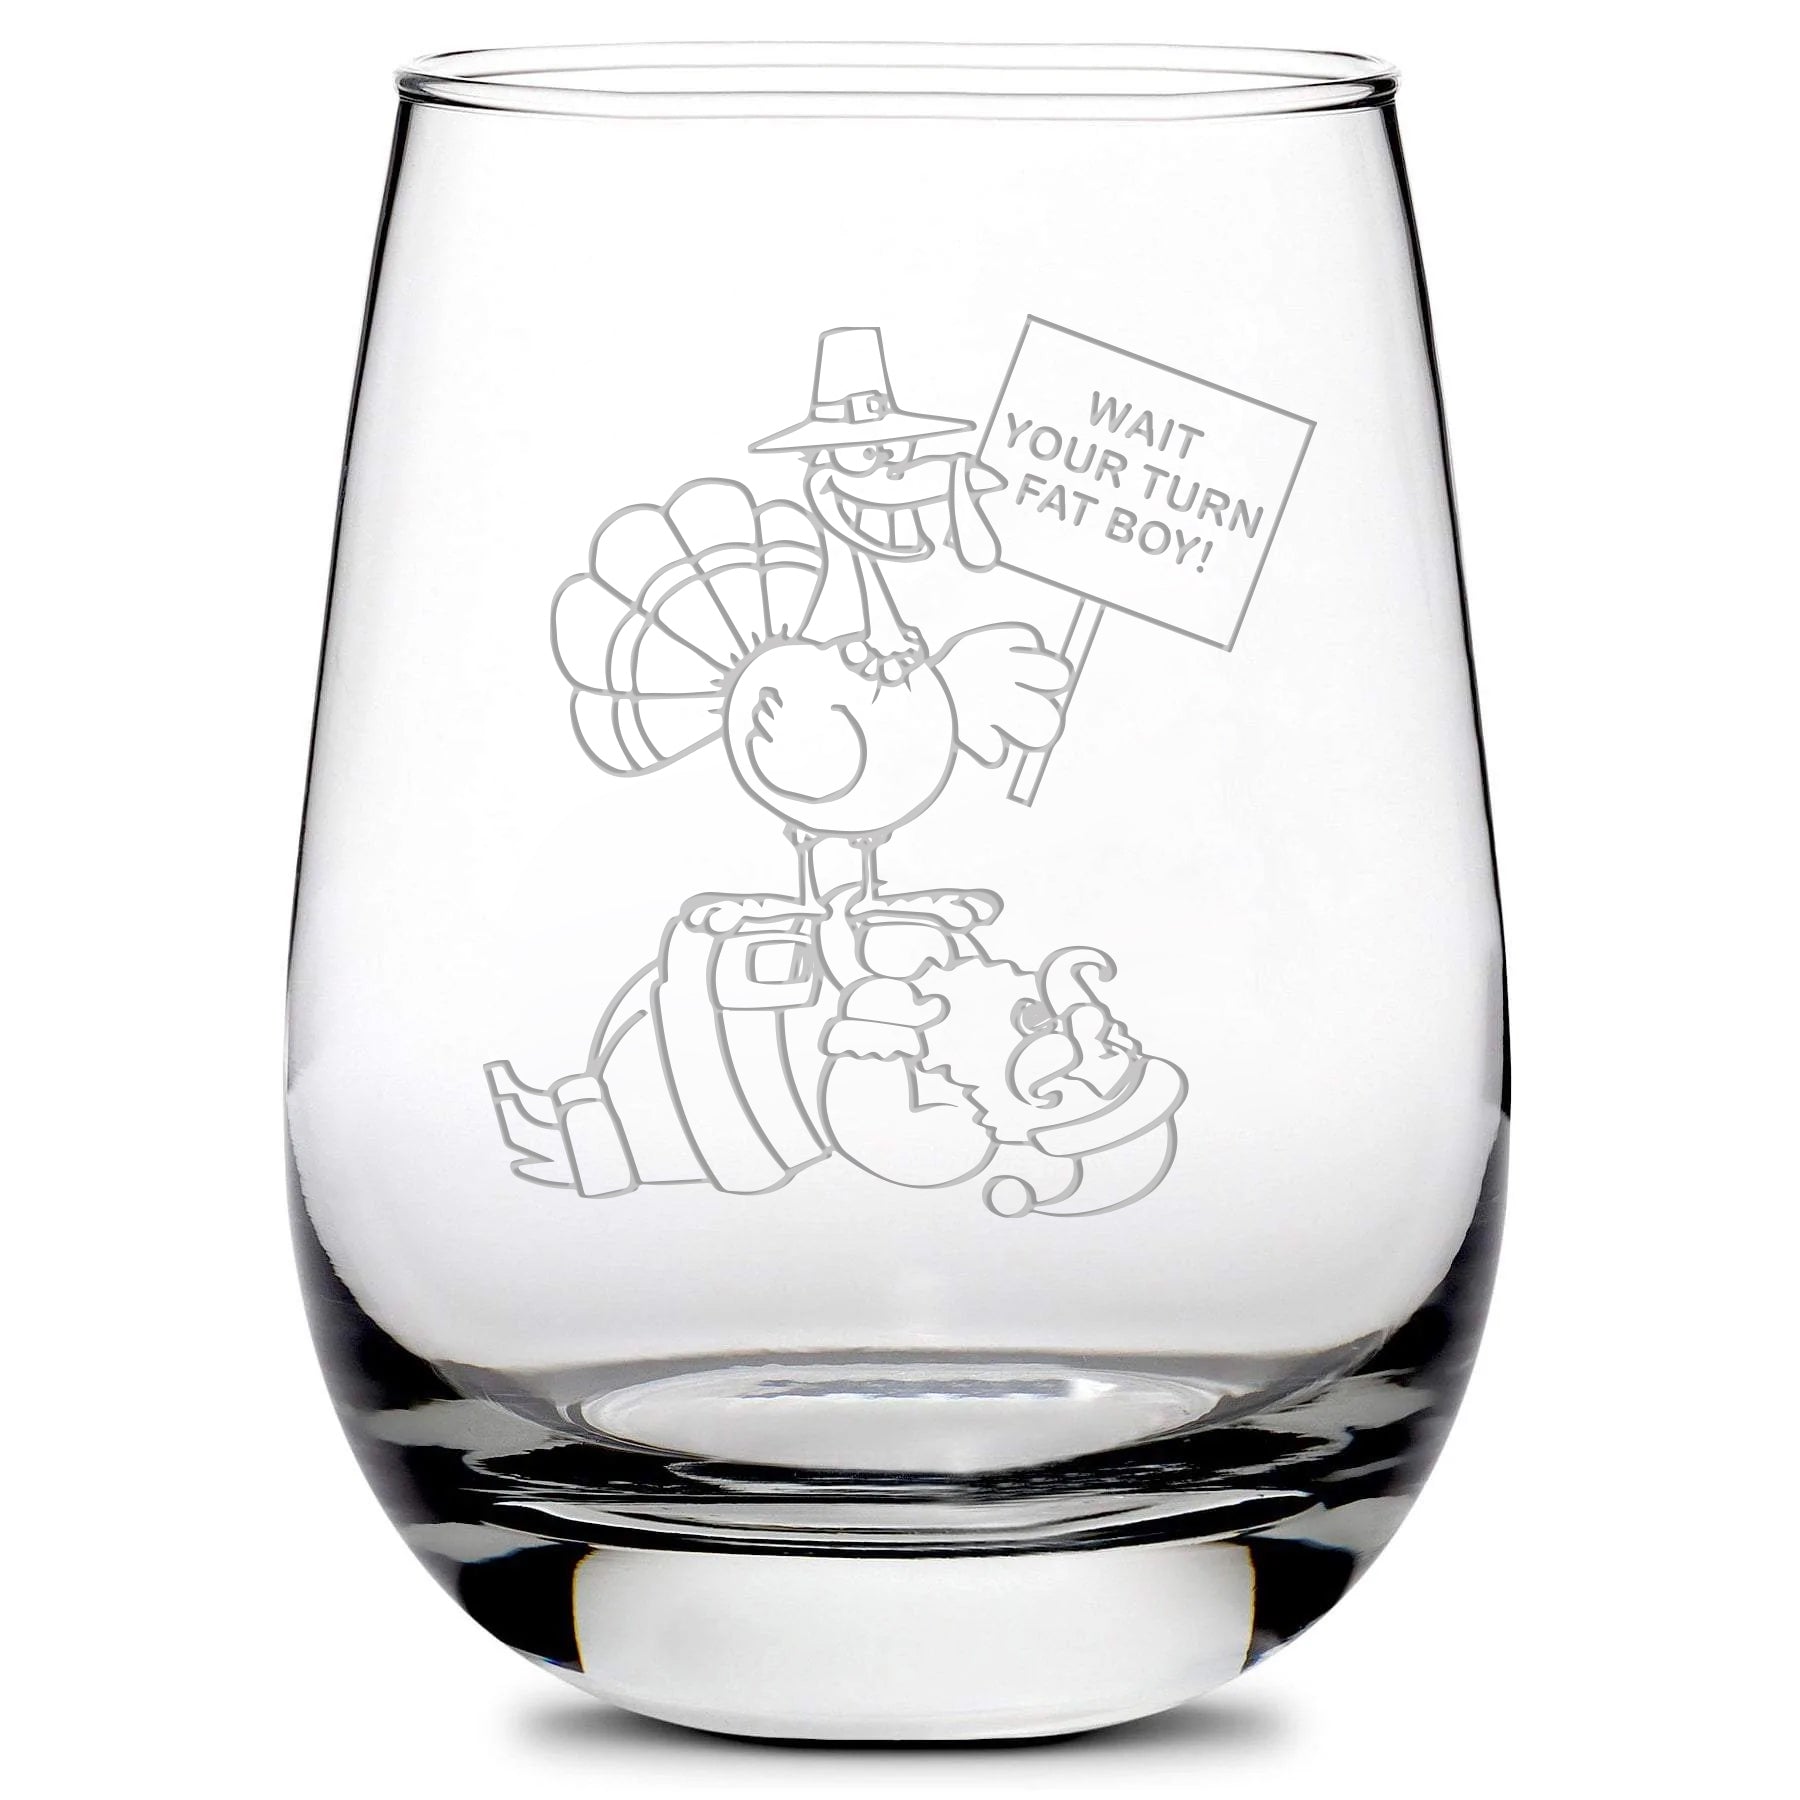 Wait Your Turn, Premium Stemless Wine Glass, Hand Etched, Made in USA, 16oz